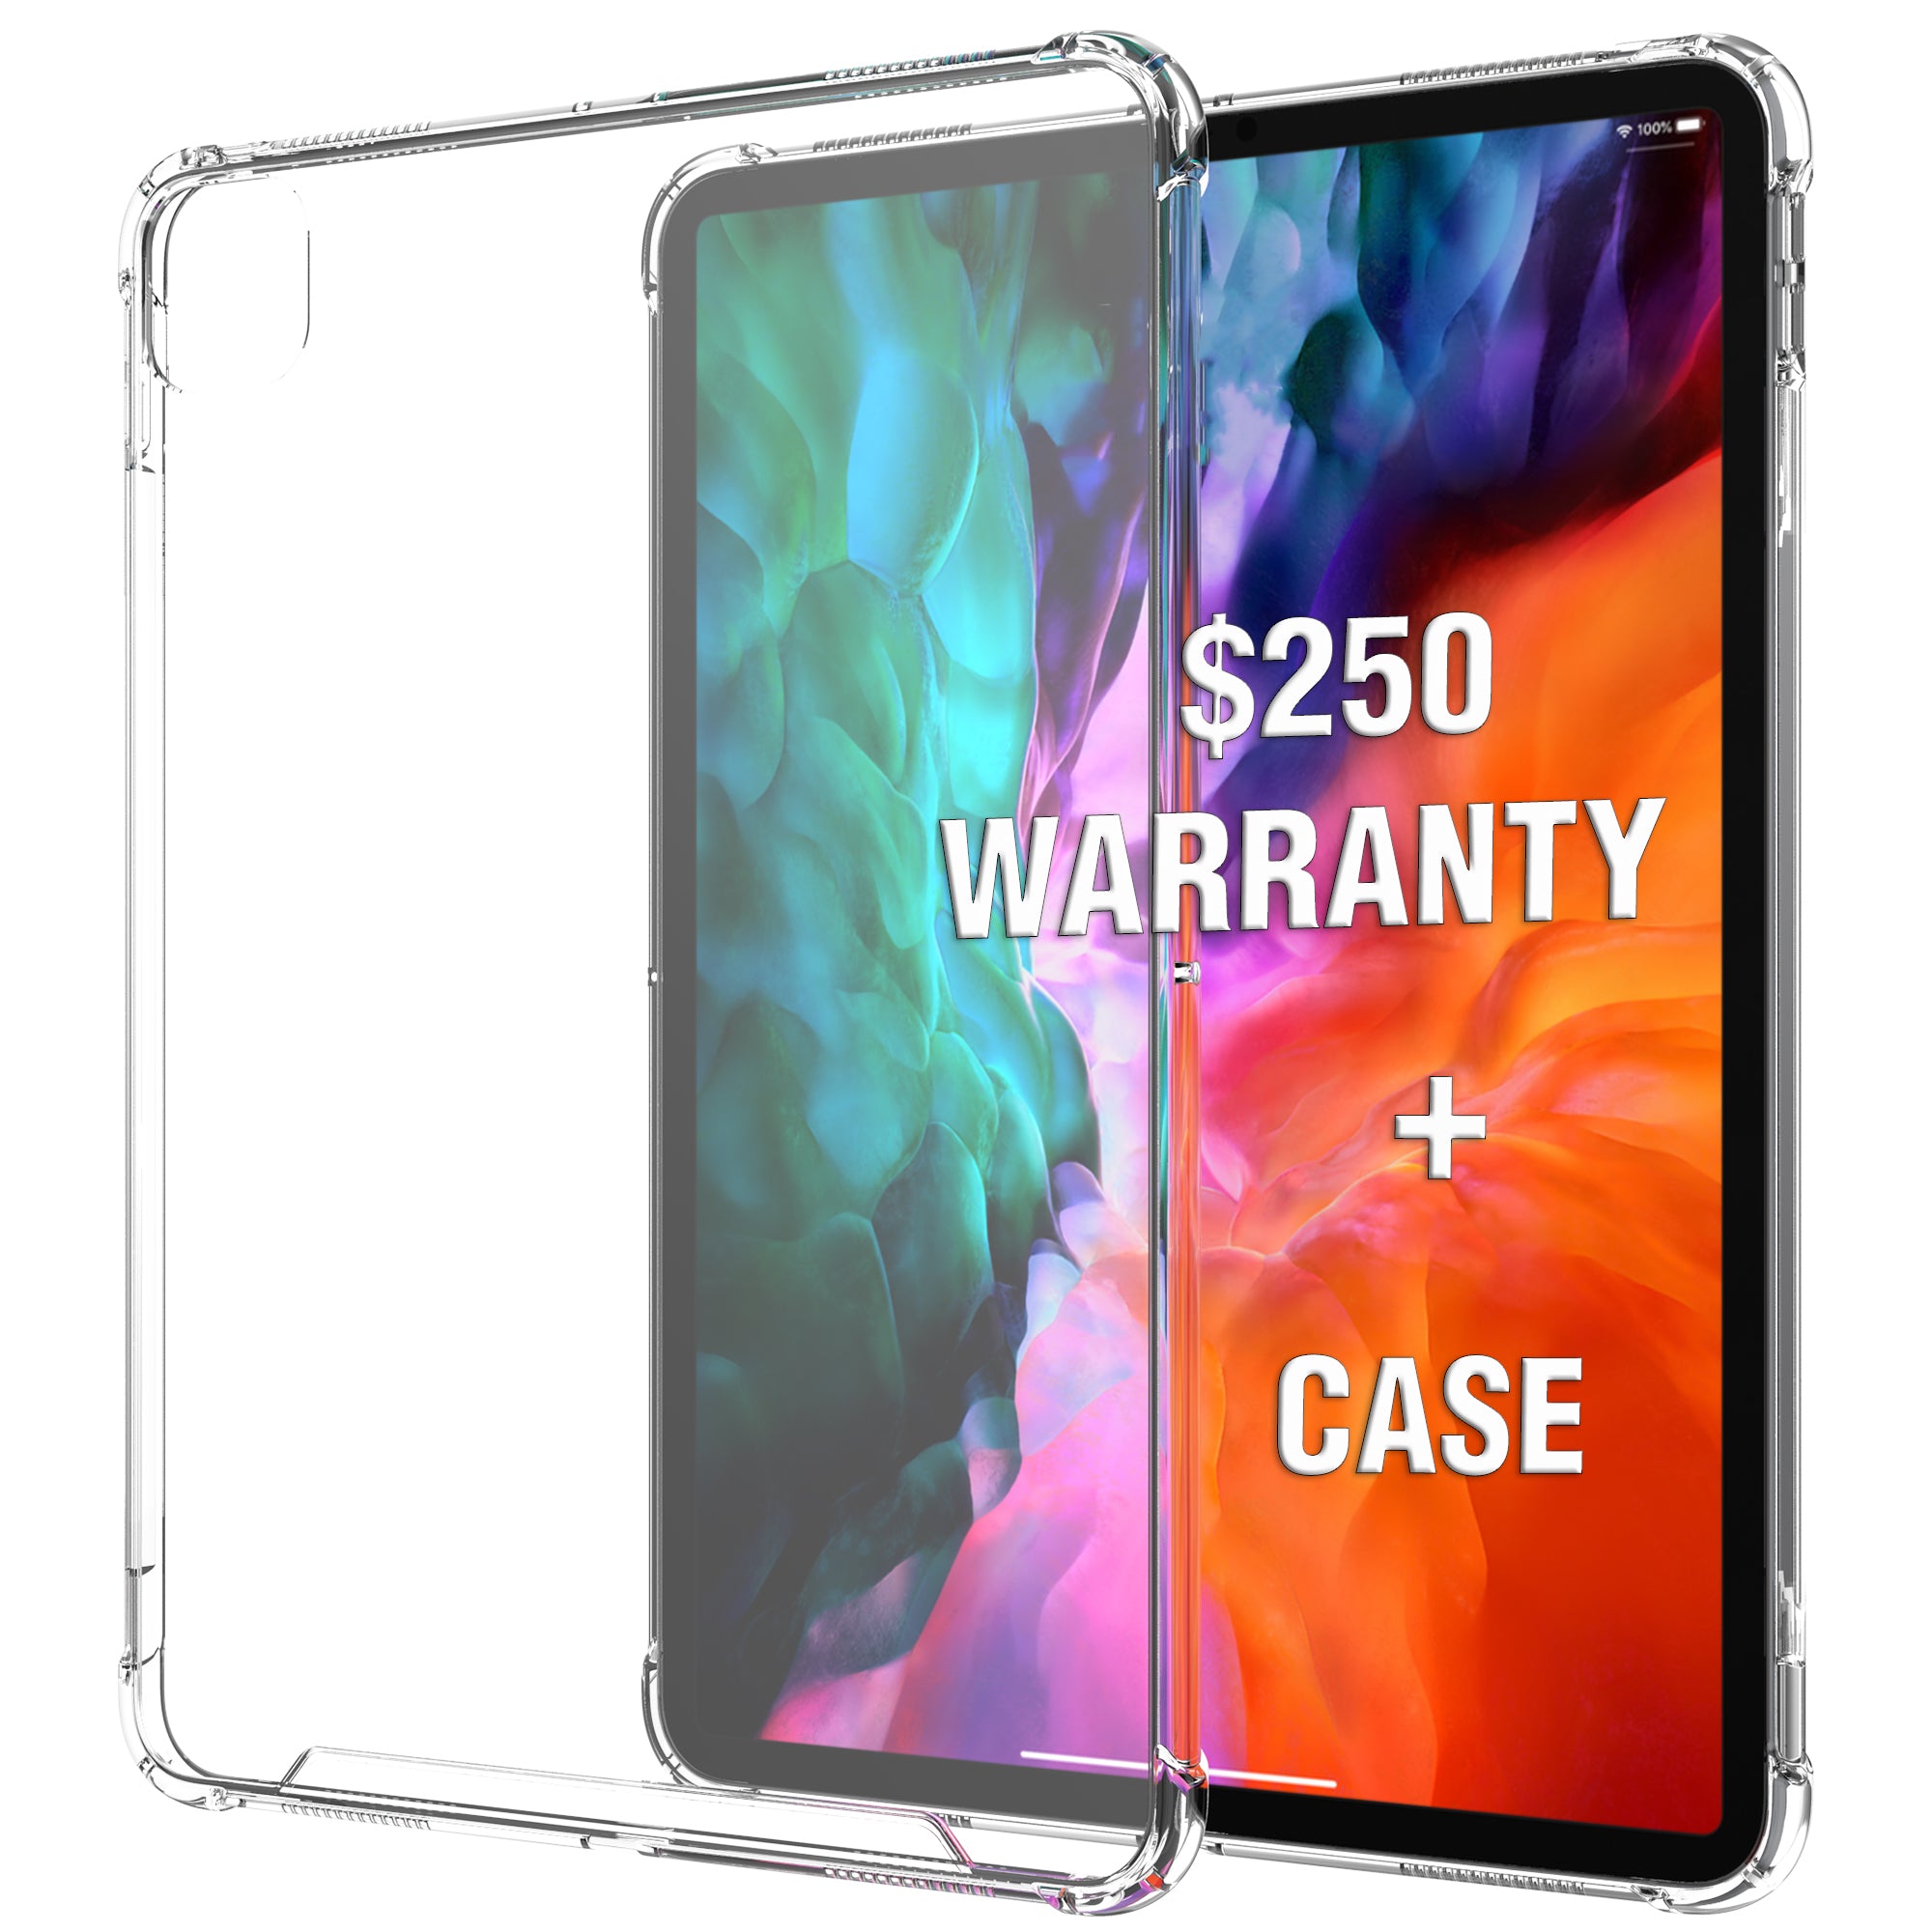 Luvvitt iPad Pro 11 Case 2020 Clear View with $250 Screen Replacement Warranty